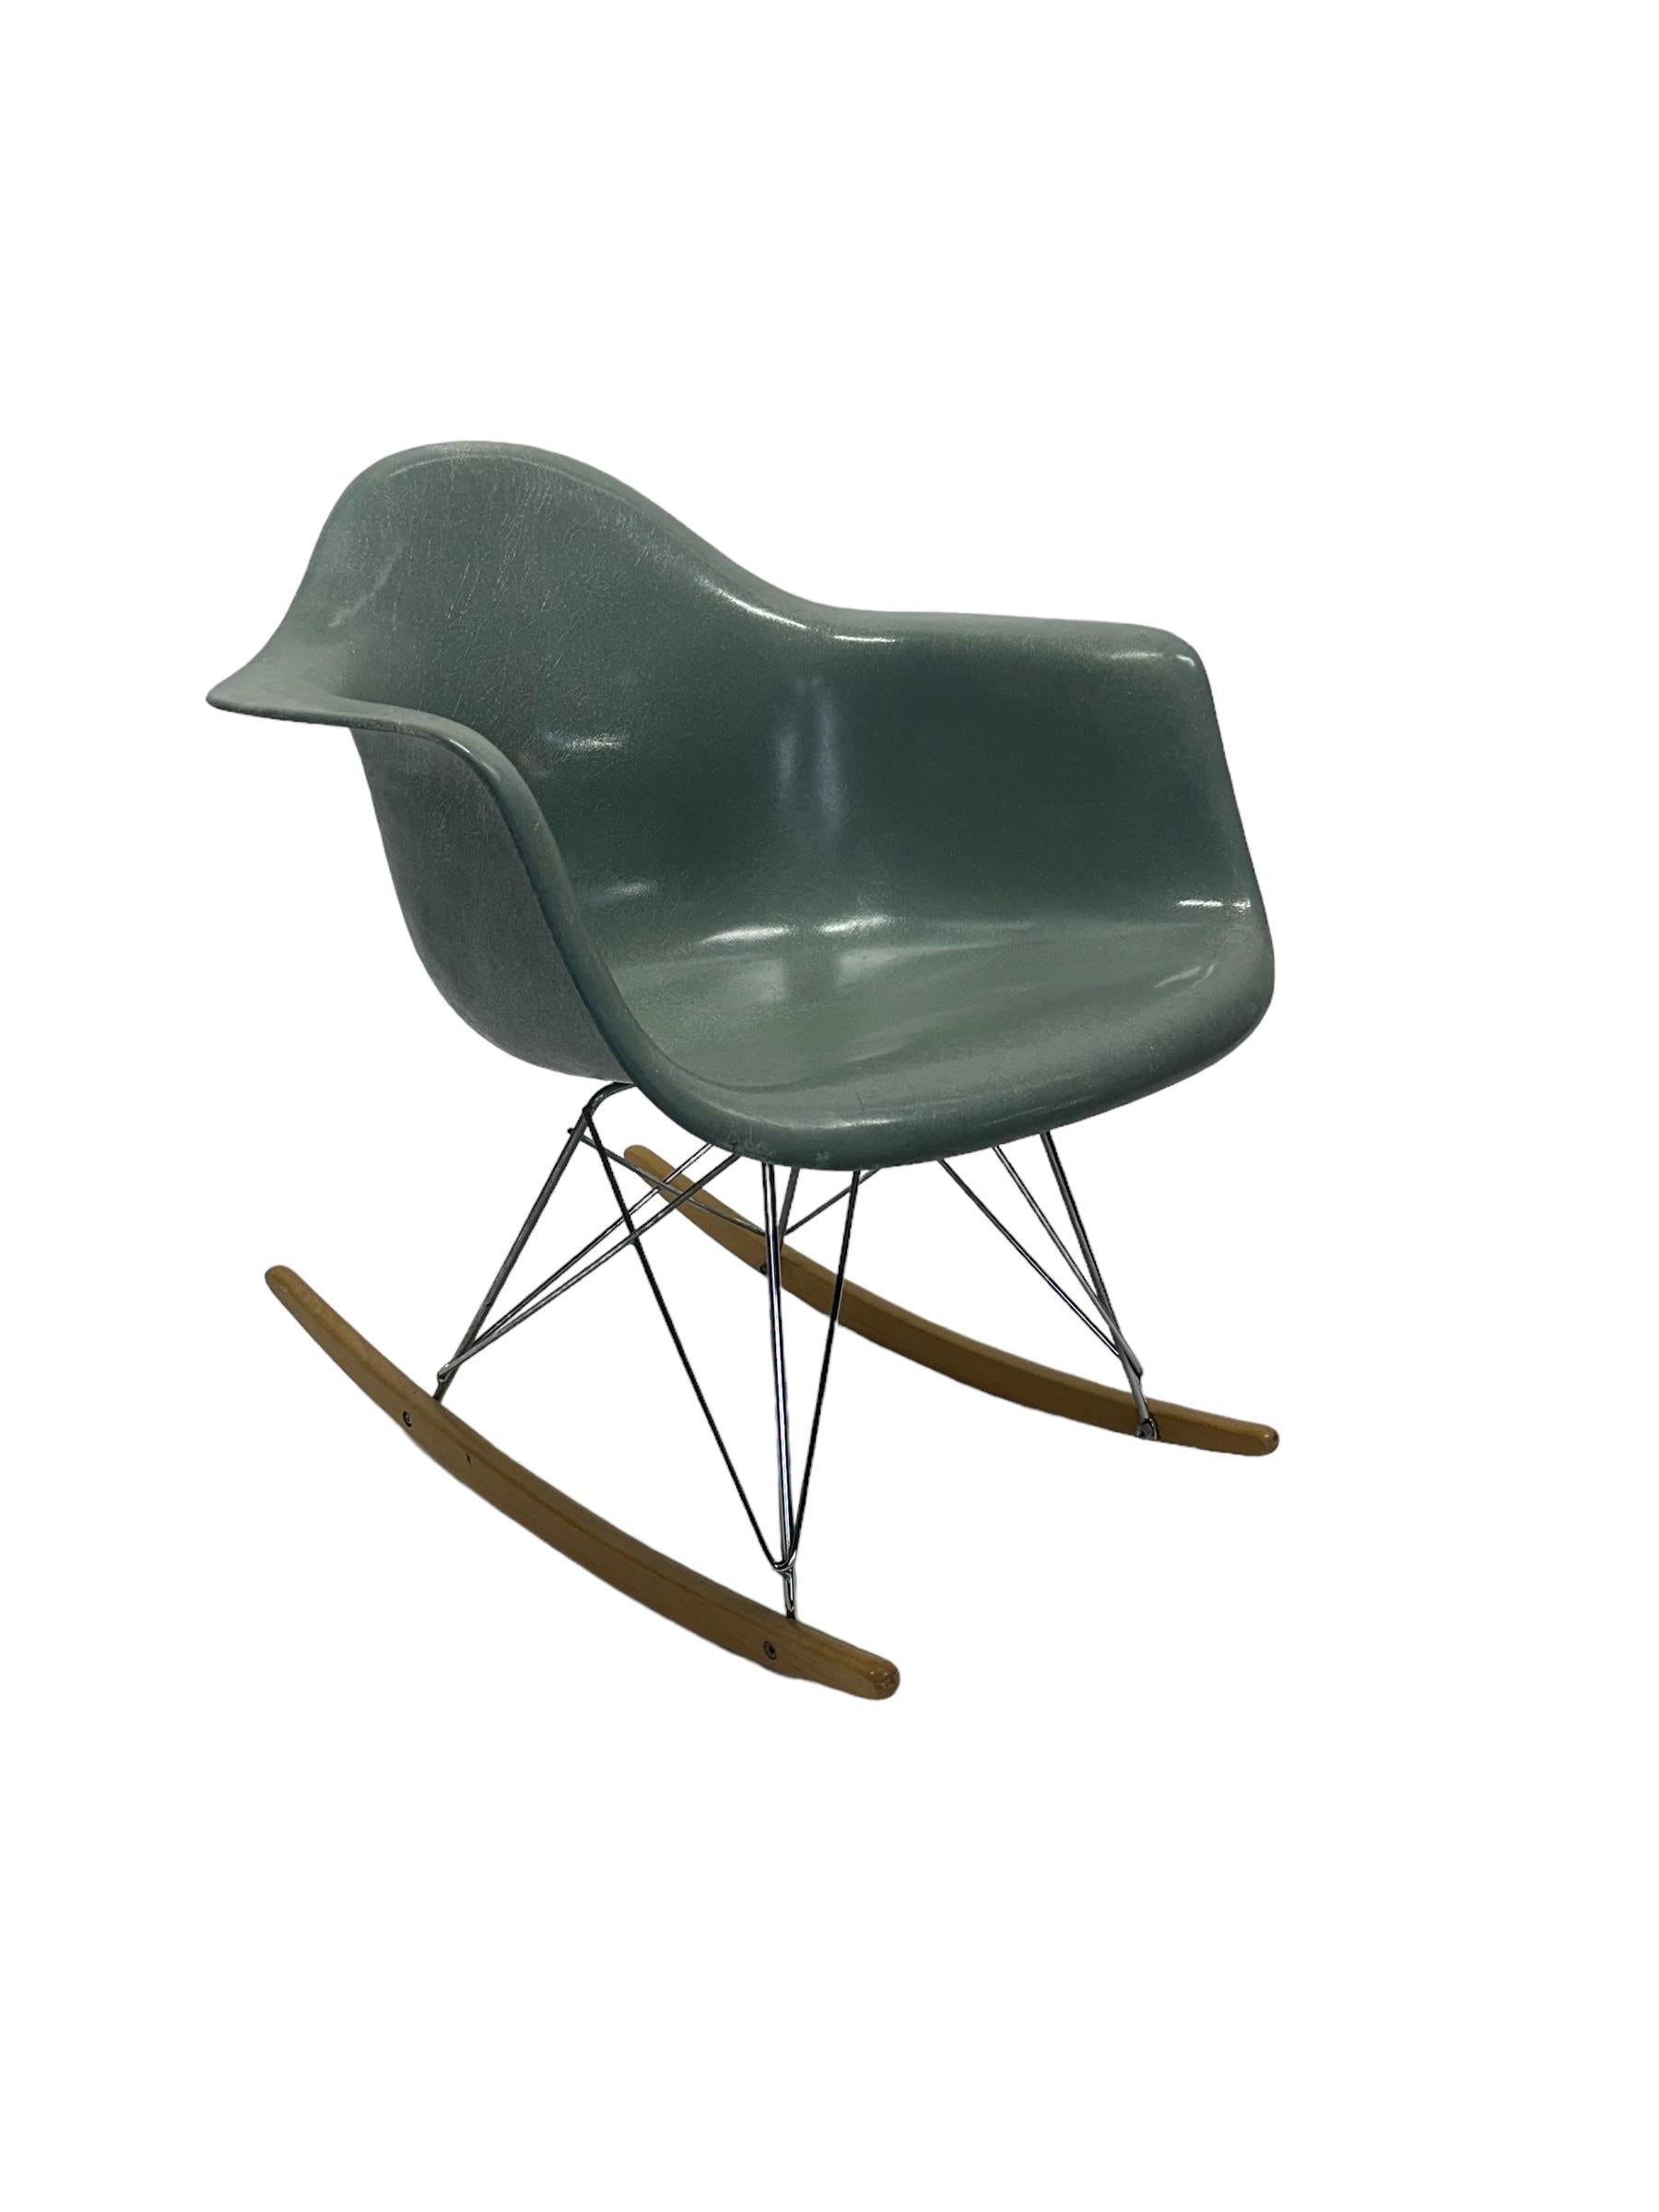 Vintage Eames molded fiberglass shell in the fairest color of them all, Seafoam Green. Original top circa late 1950s-early 1960s. On later metal and wood base, in good condition with normal markings/wear but nothing egregious. Shell signed and